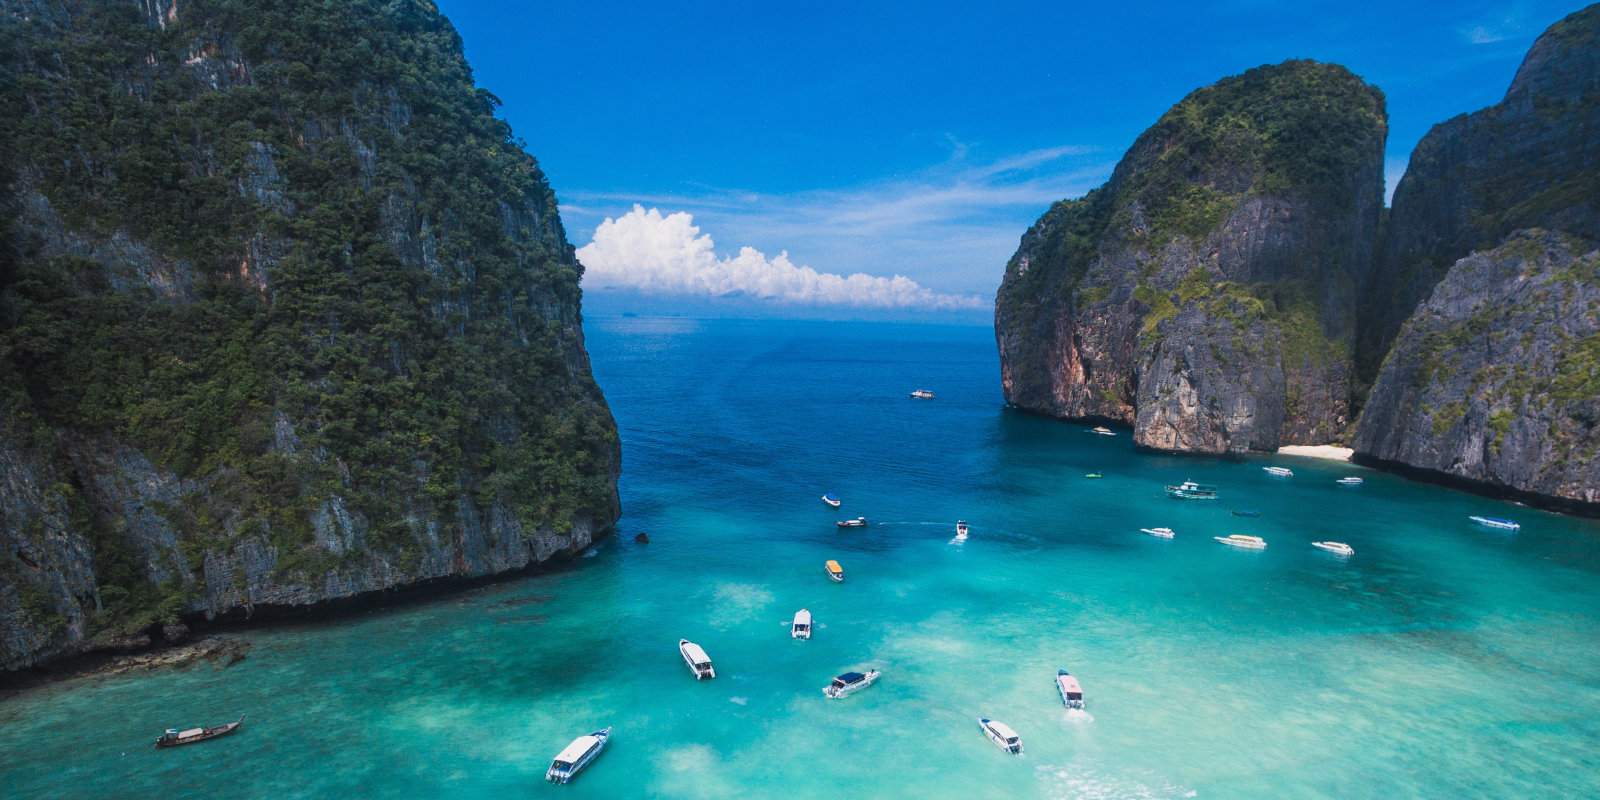 Explore the stunning natural beauty of Thailand on an au naturel cruise